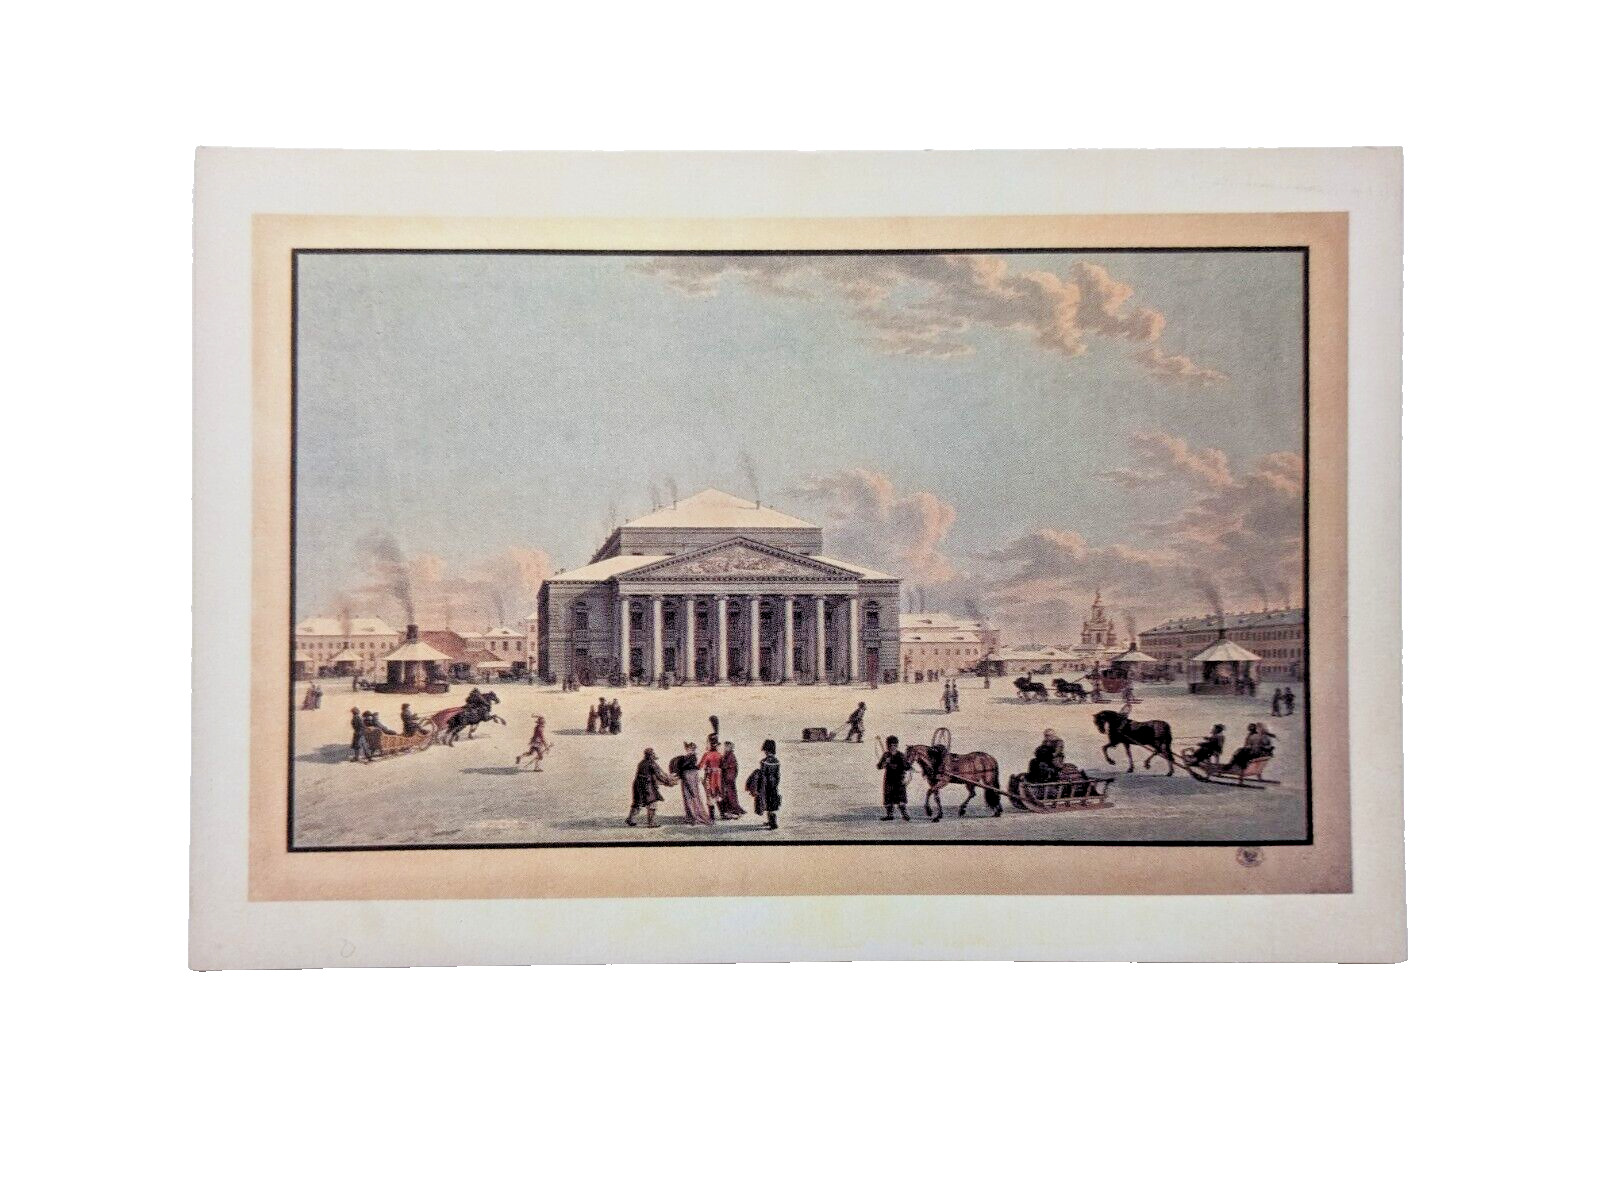 A View of the Bolshoi Theater, St. Petersburg Engraving by Lory VTG Art Postcard